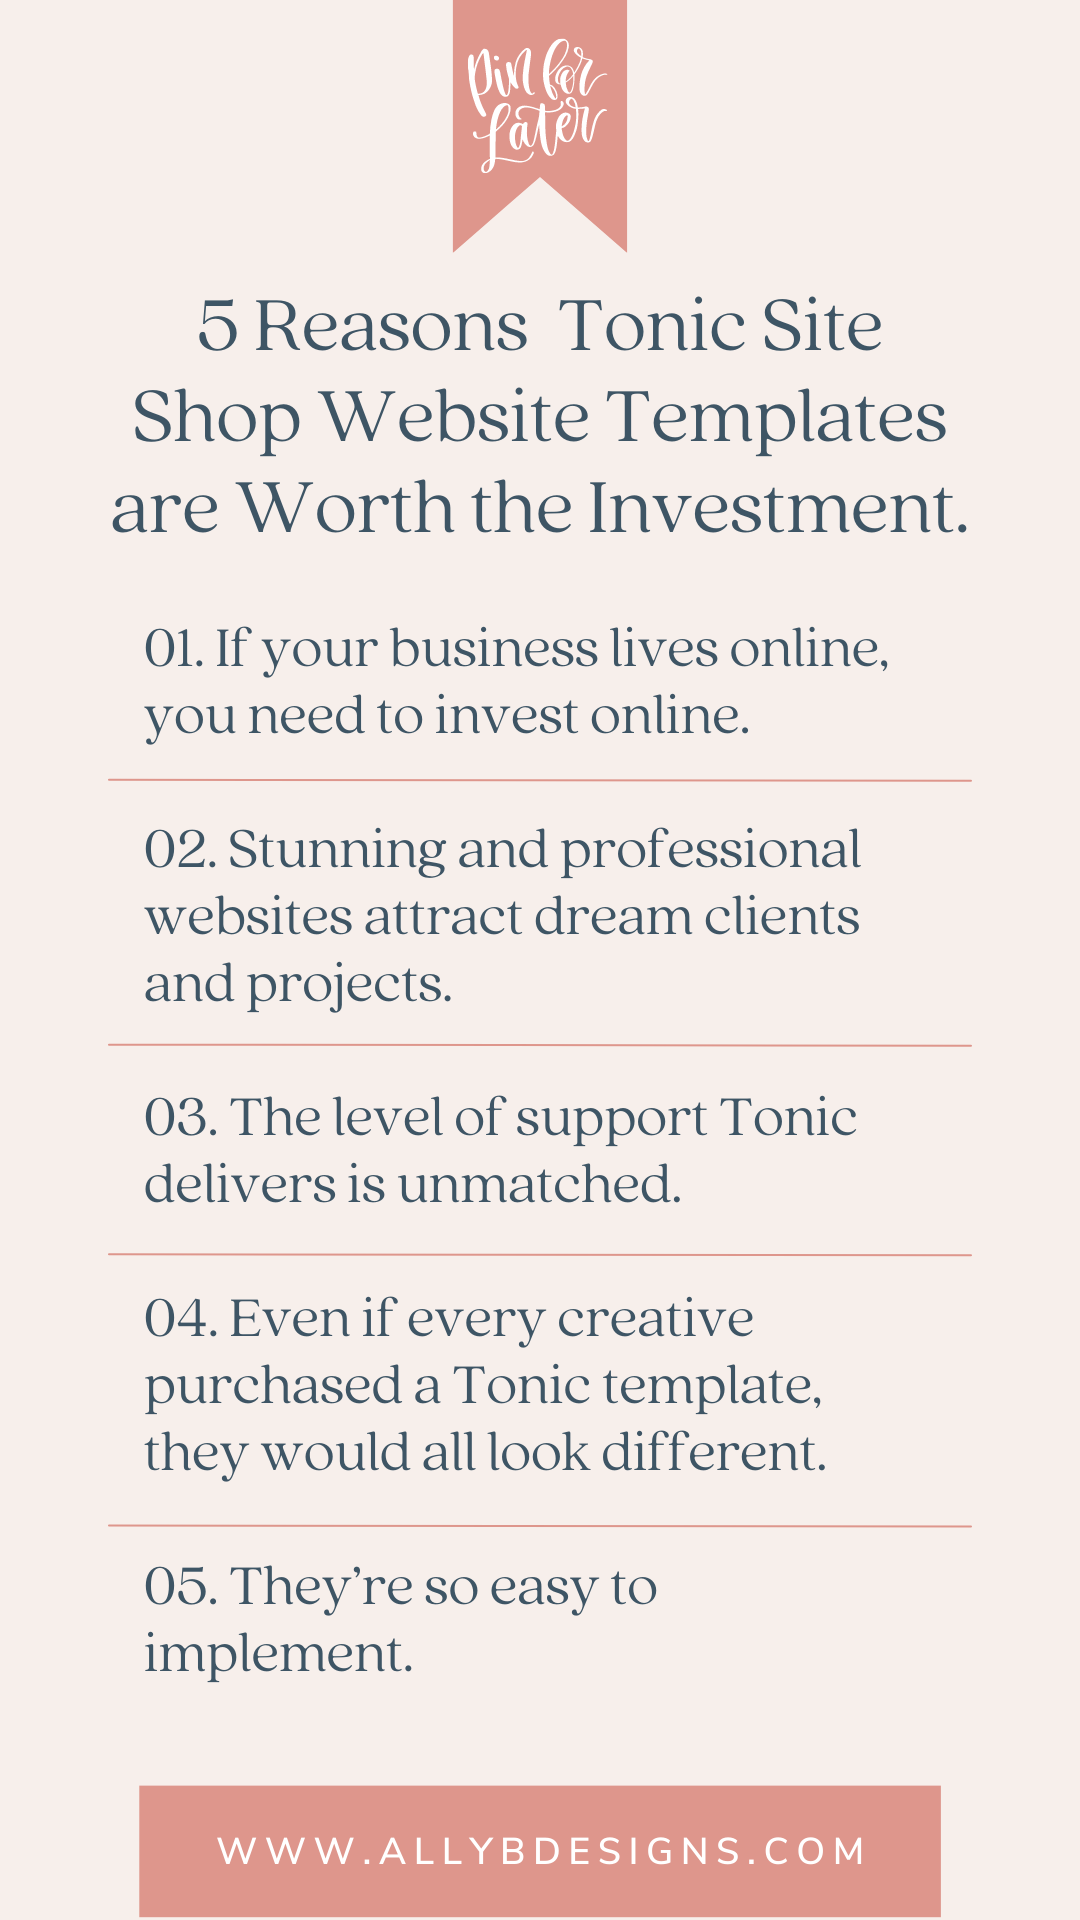 5 Reasons Tonic Website Templates are Worth the Investment - Blog Post by Ally B Designs